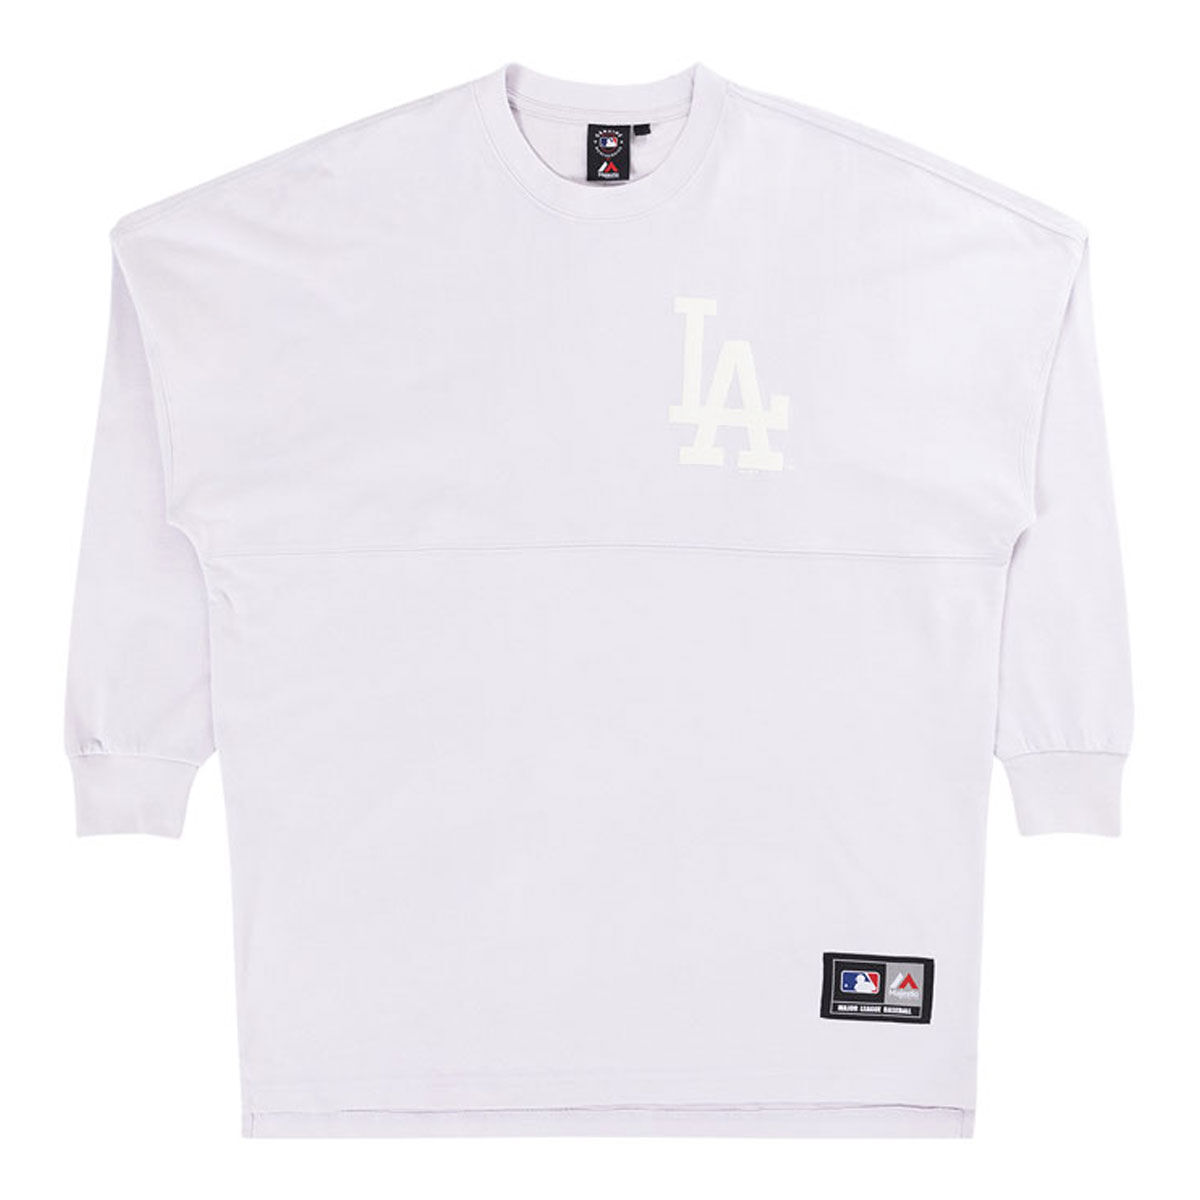 Majestic, Shirts & Tops, Girls Dodgers Pink Jersey